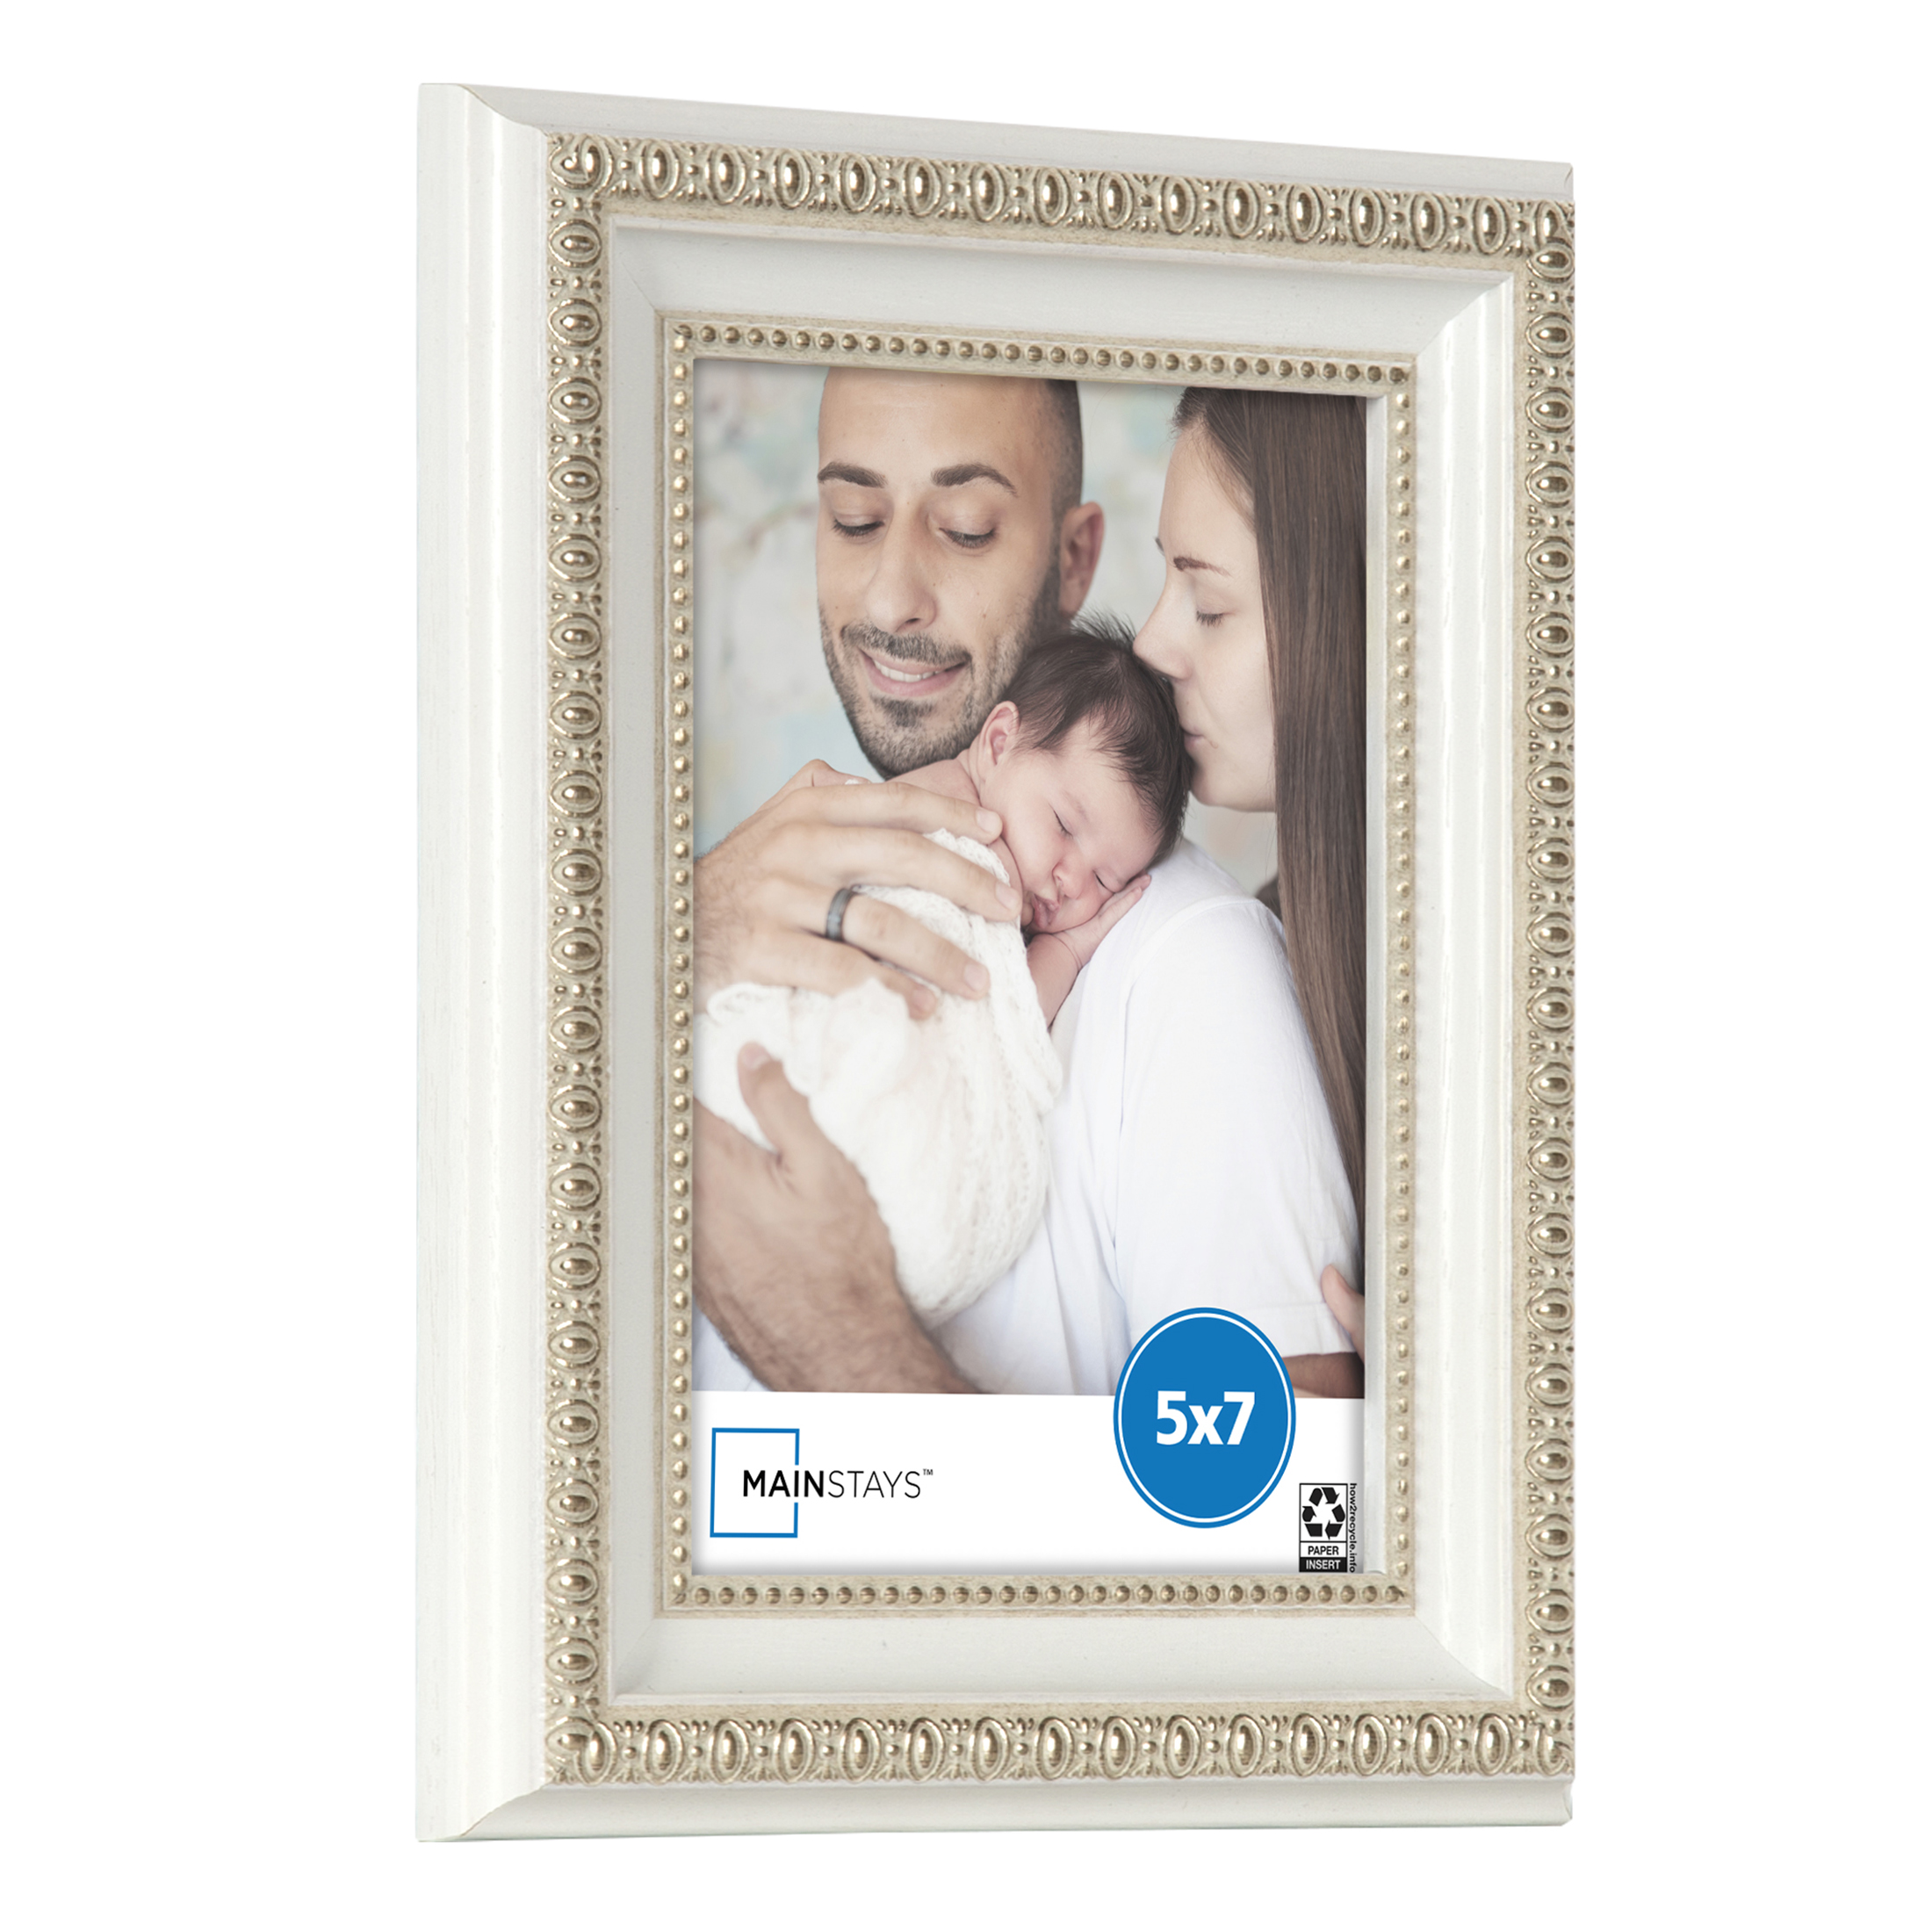 Mainstays 5x7 White Ornate Decorative Tabletop Picture Frame